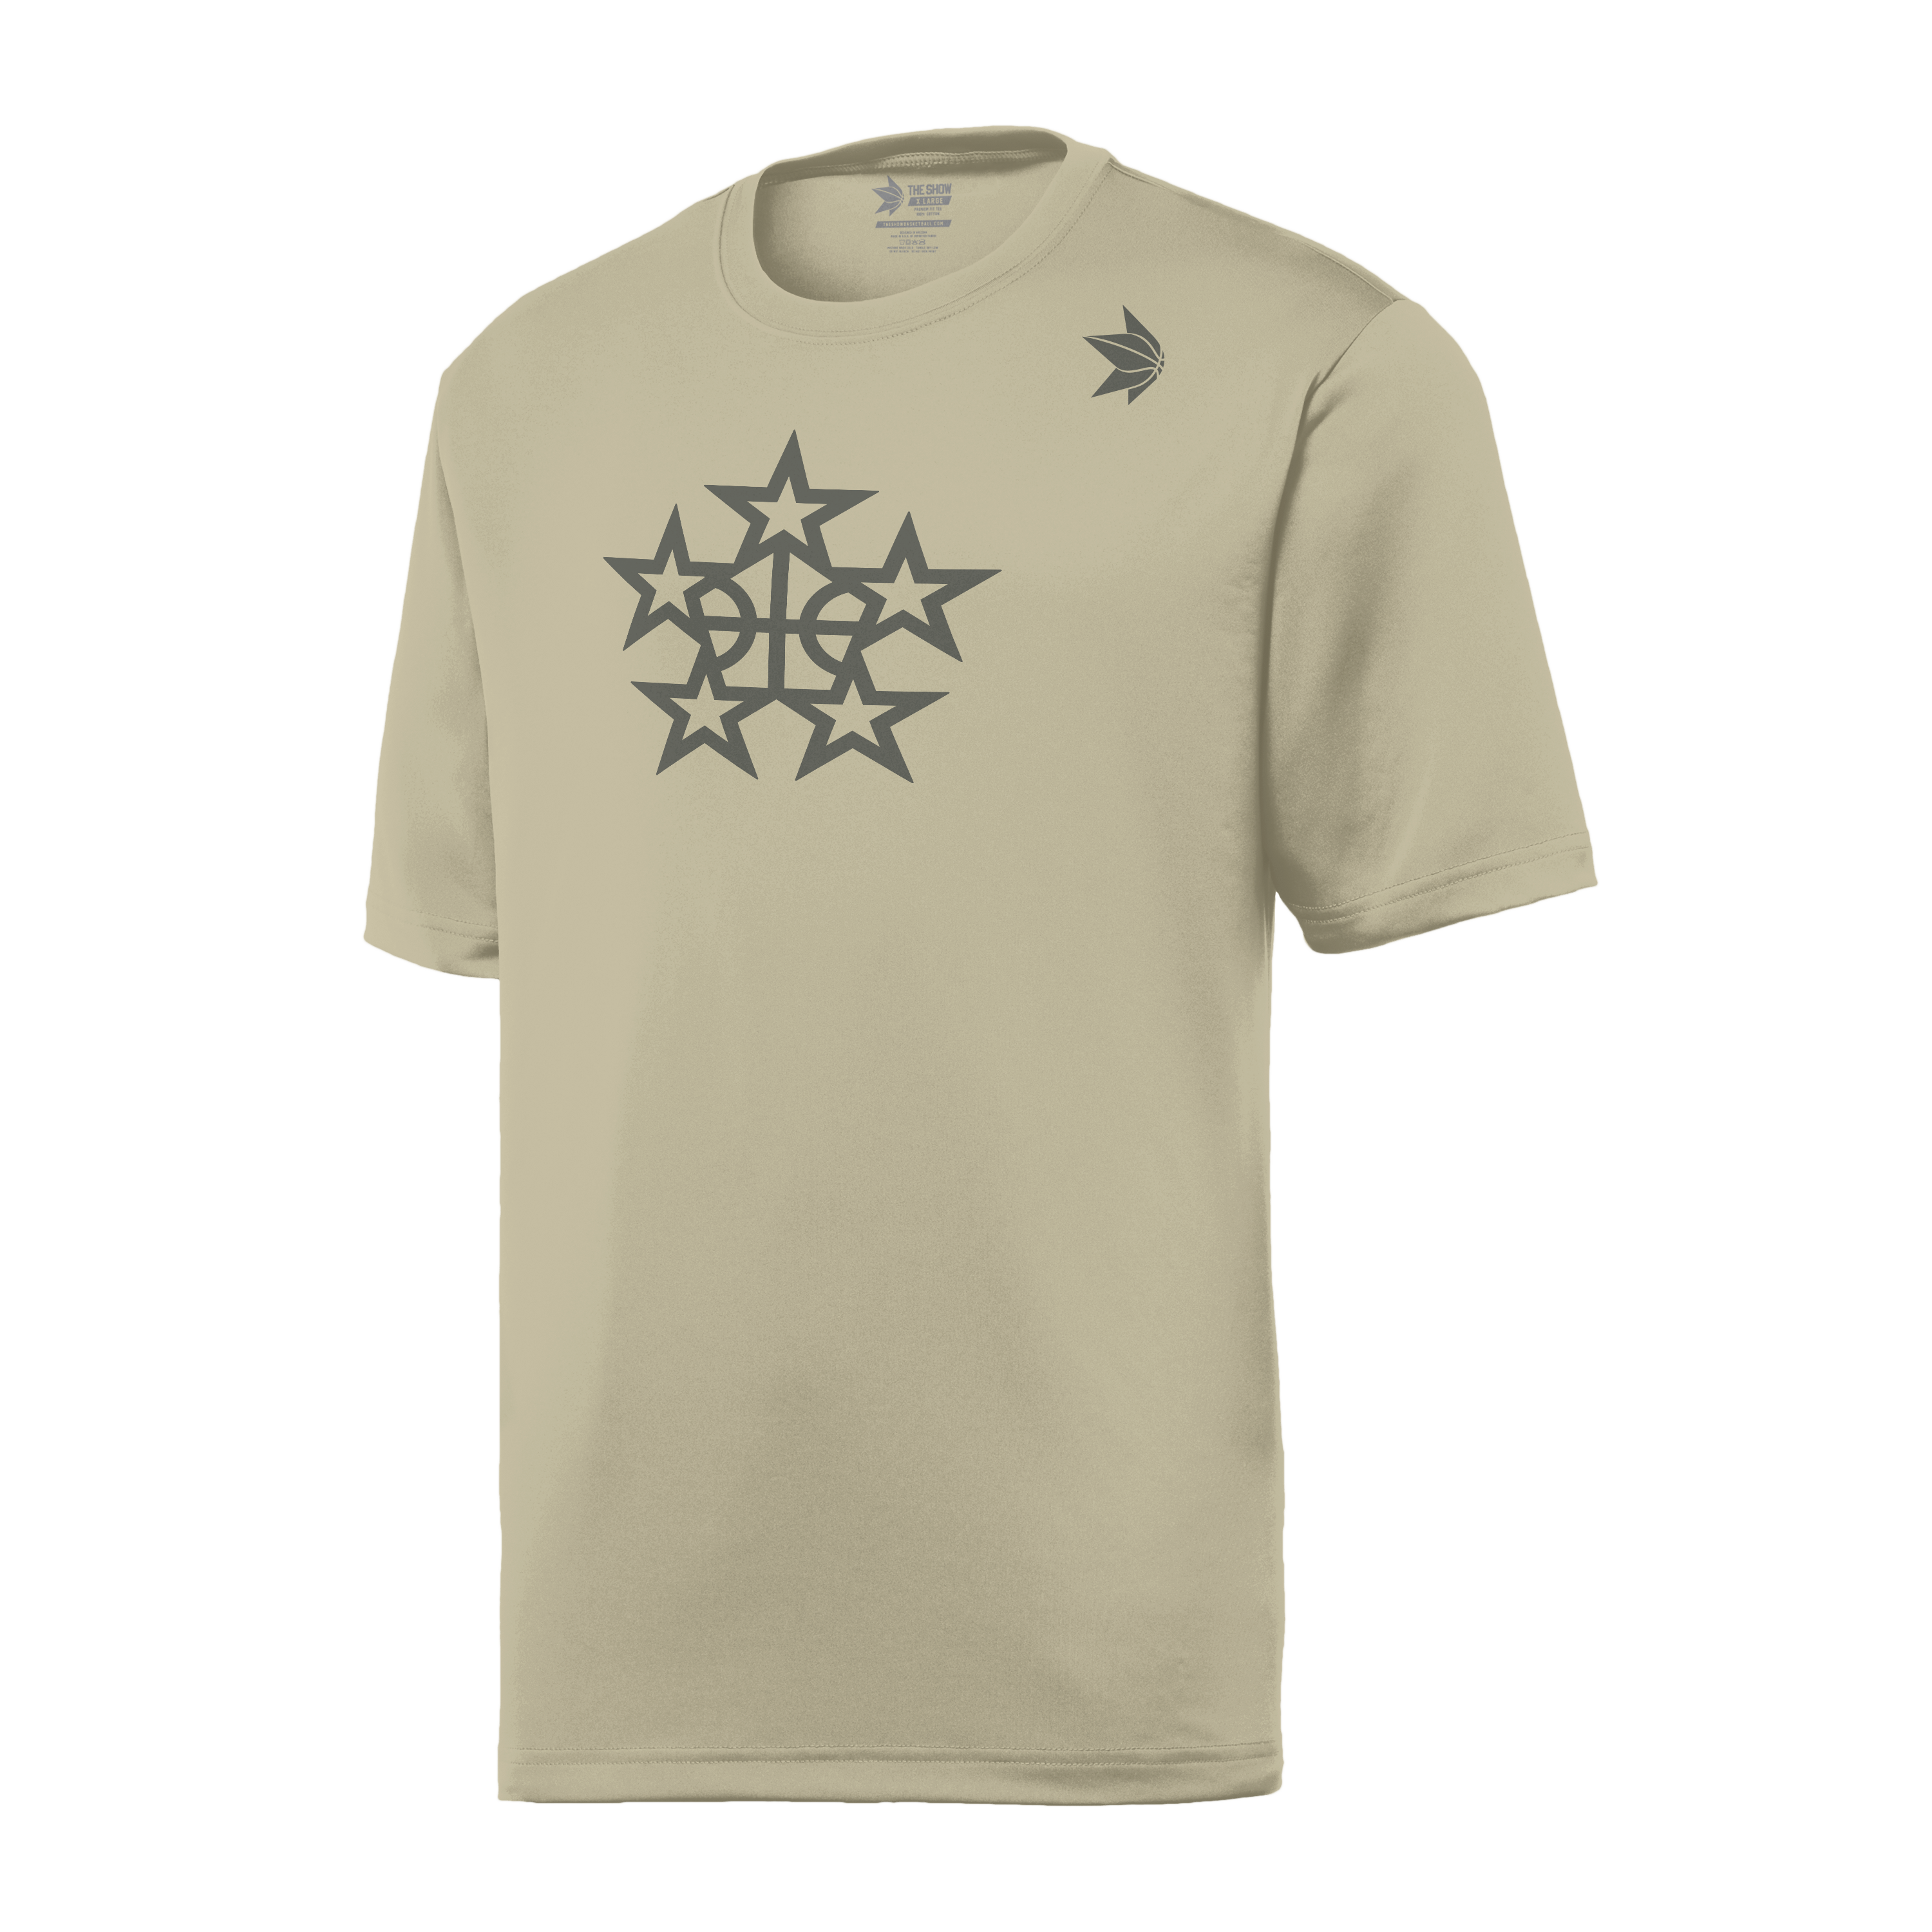 Five Star General Tee - Sand - The Show Basketball